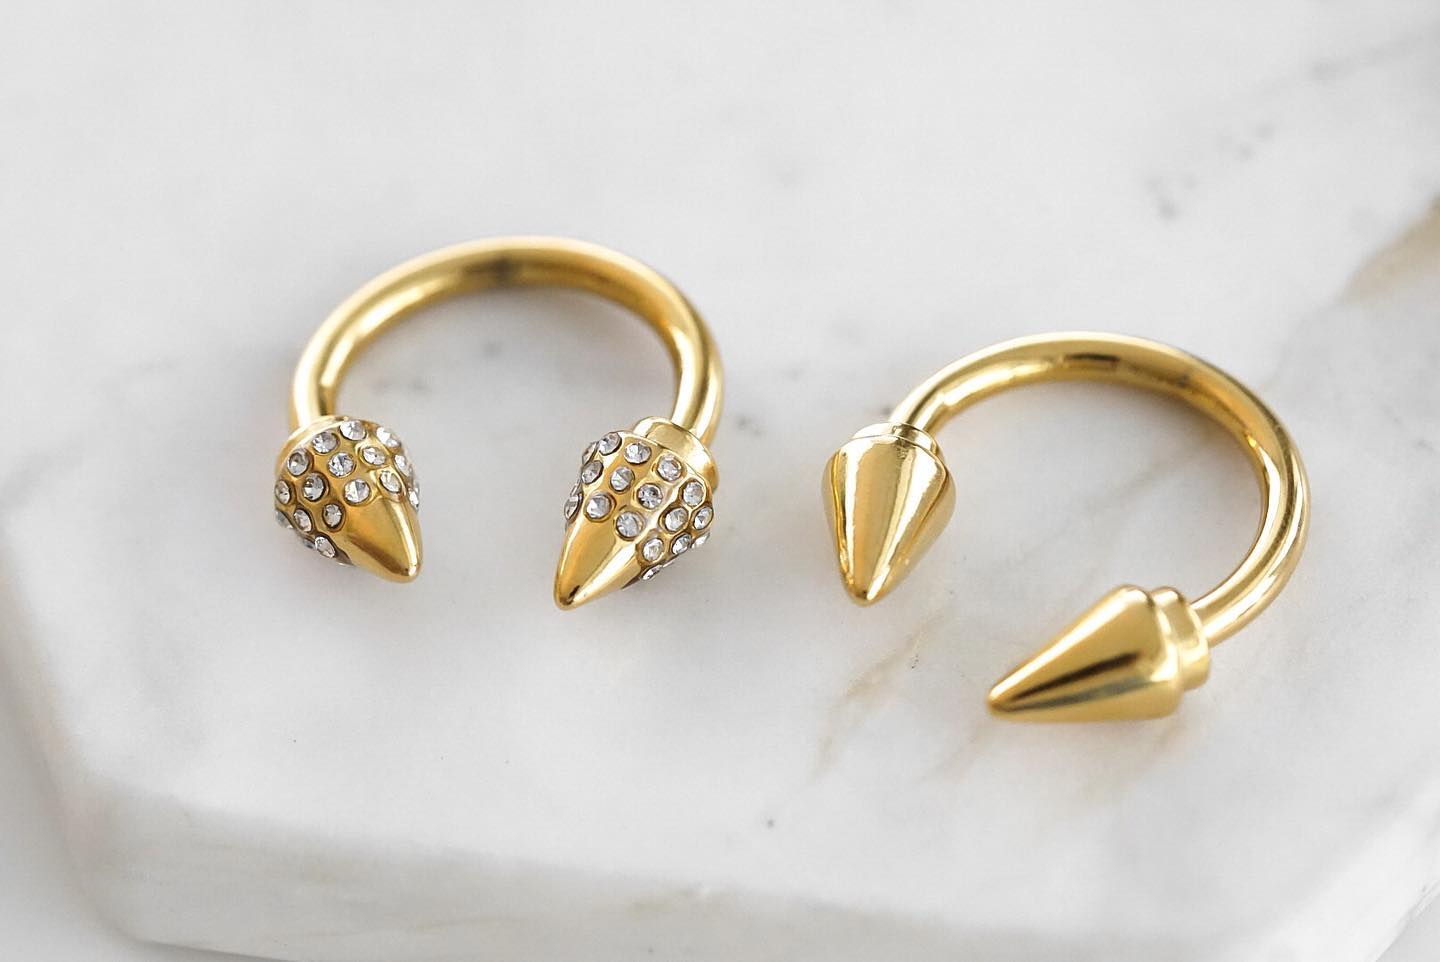 Spike Collection - Gold Ring Set fine designer jewelry for men and women